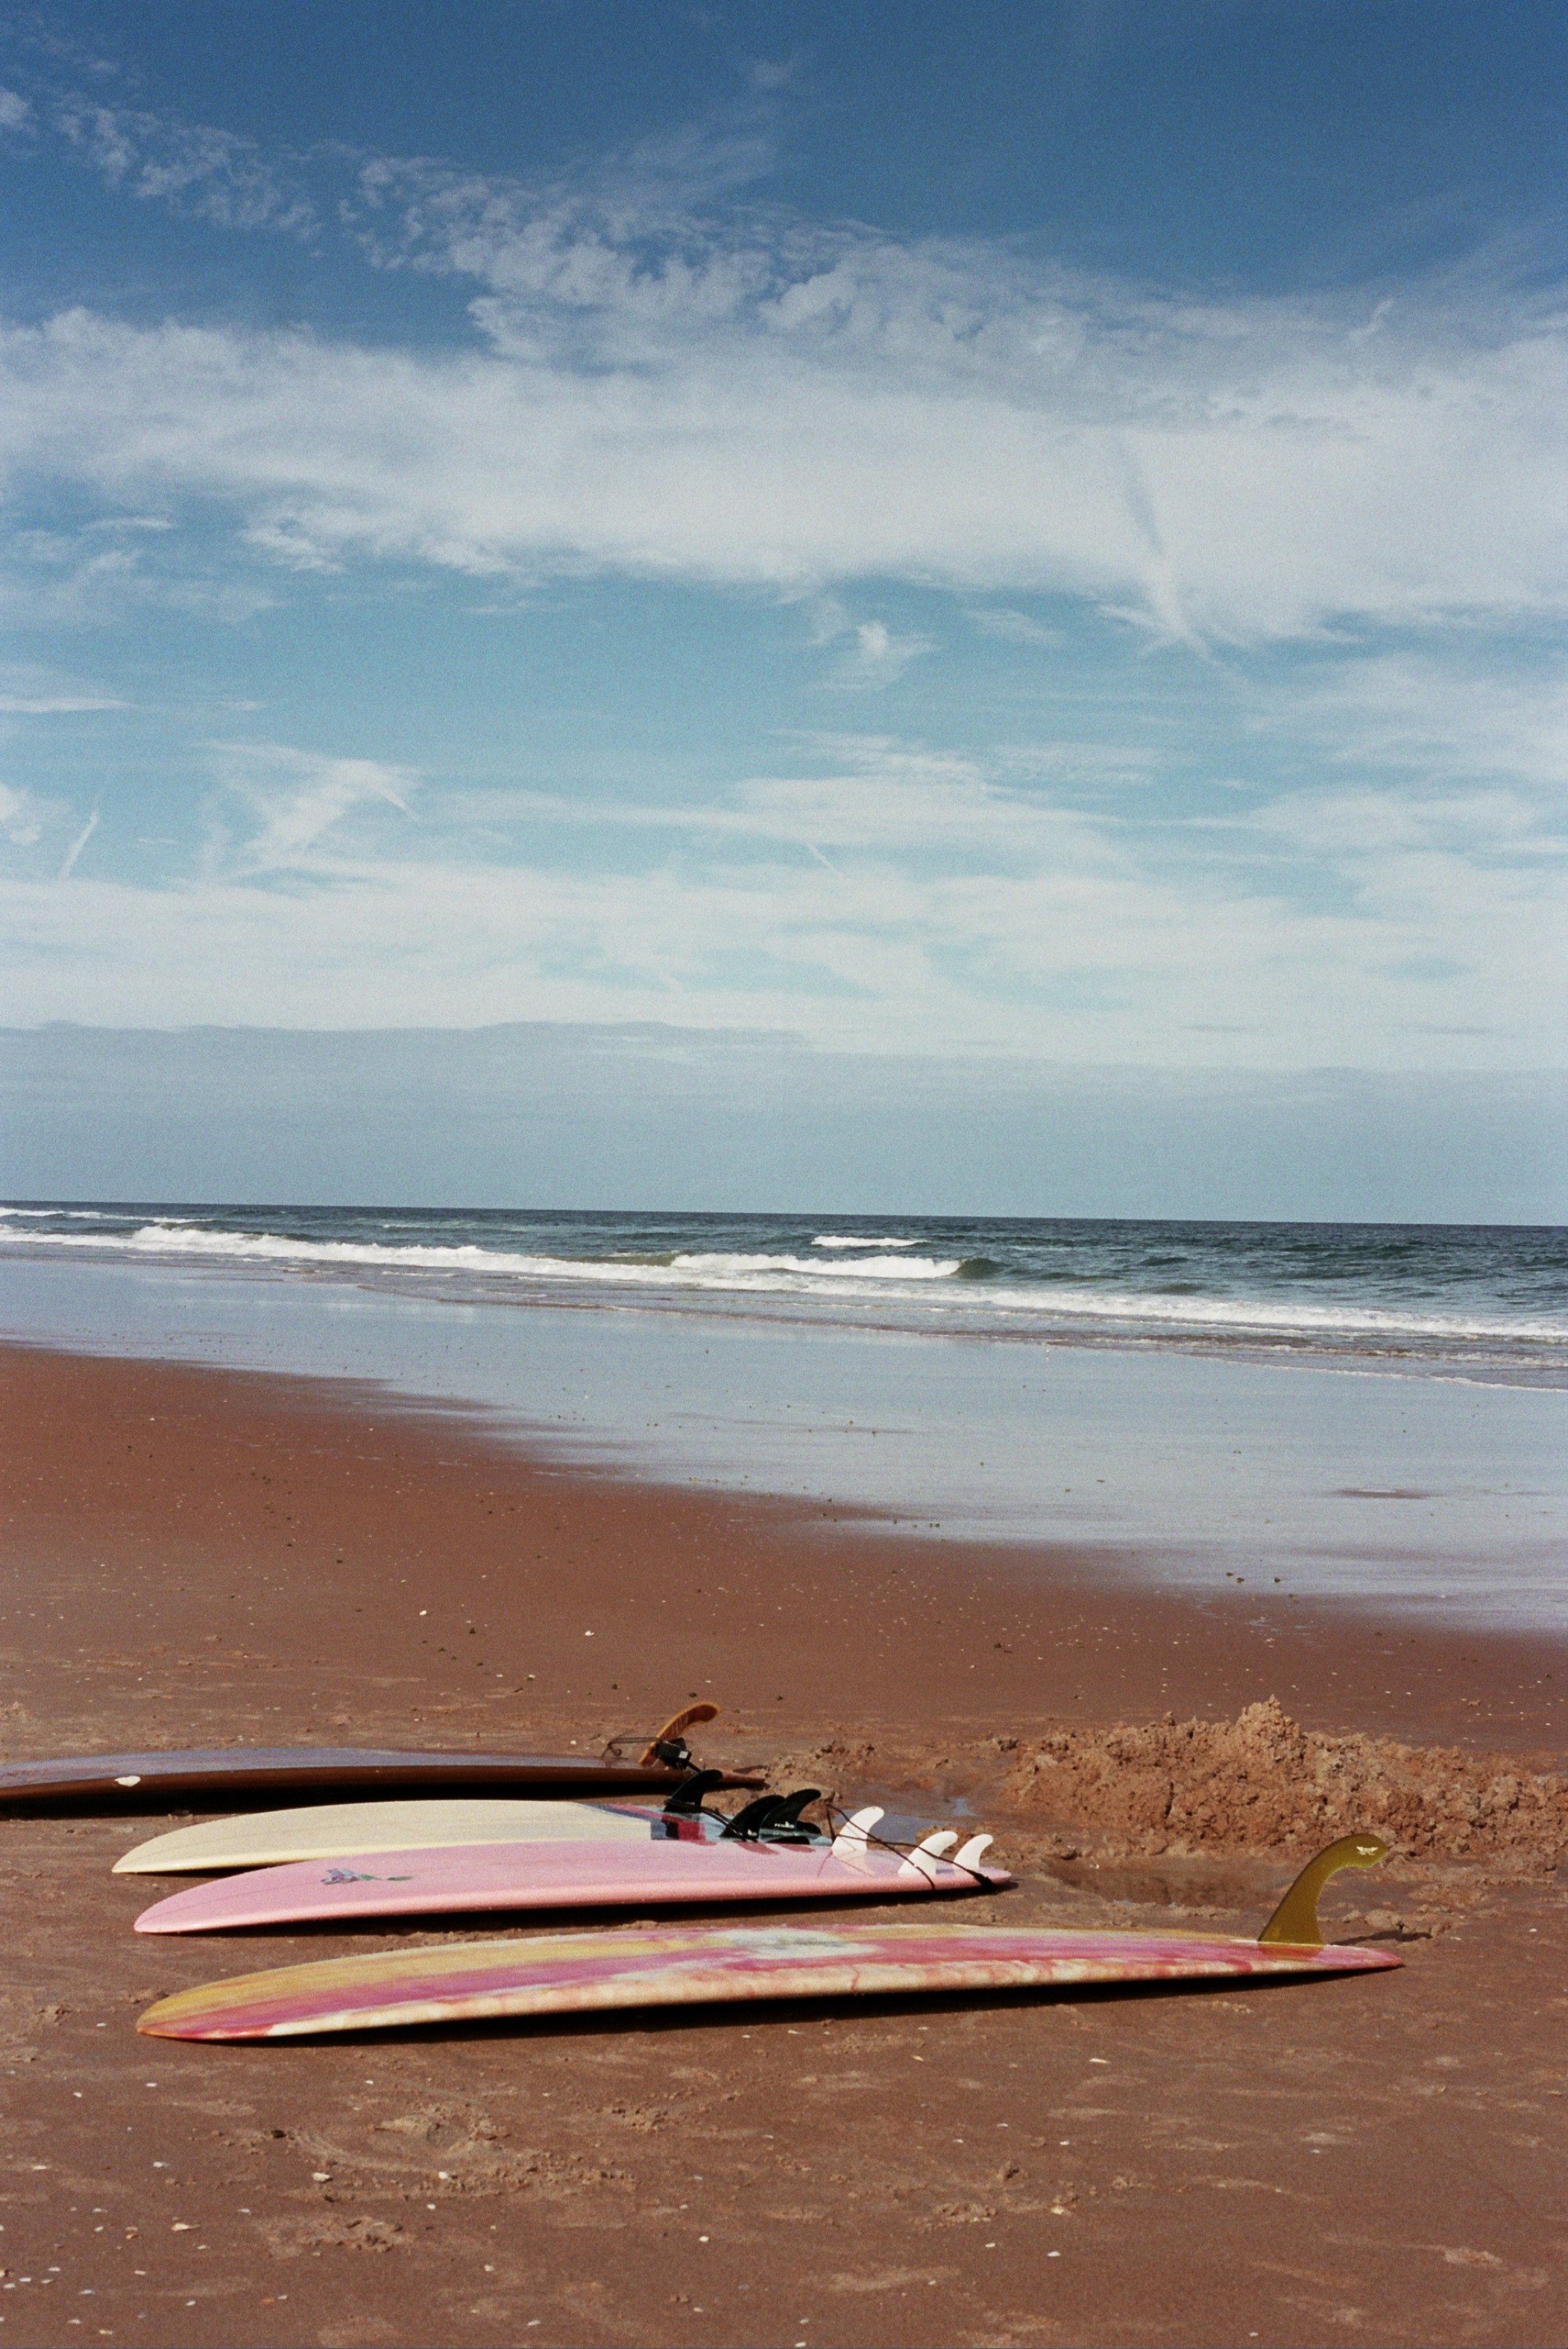  All of our boards lined up on the beach 